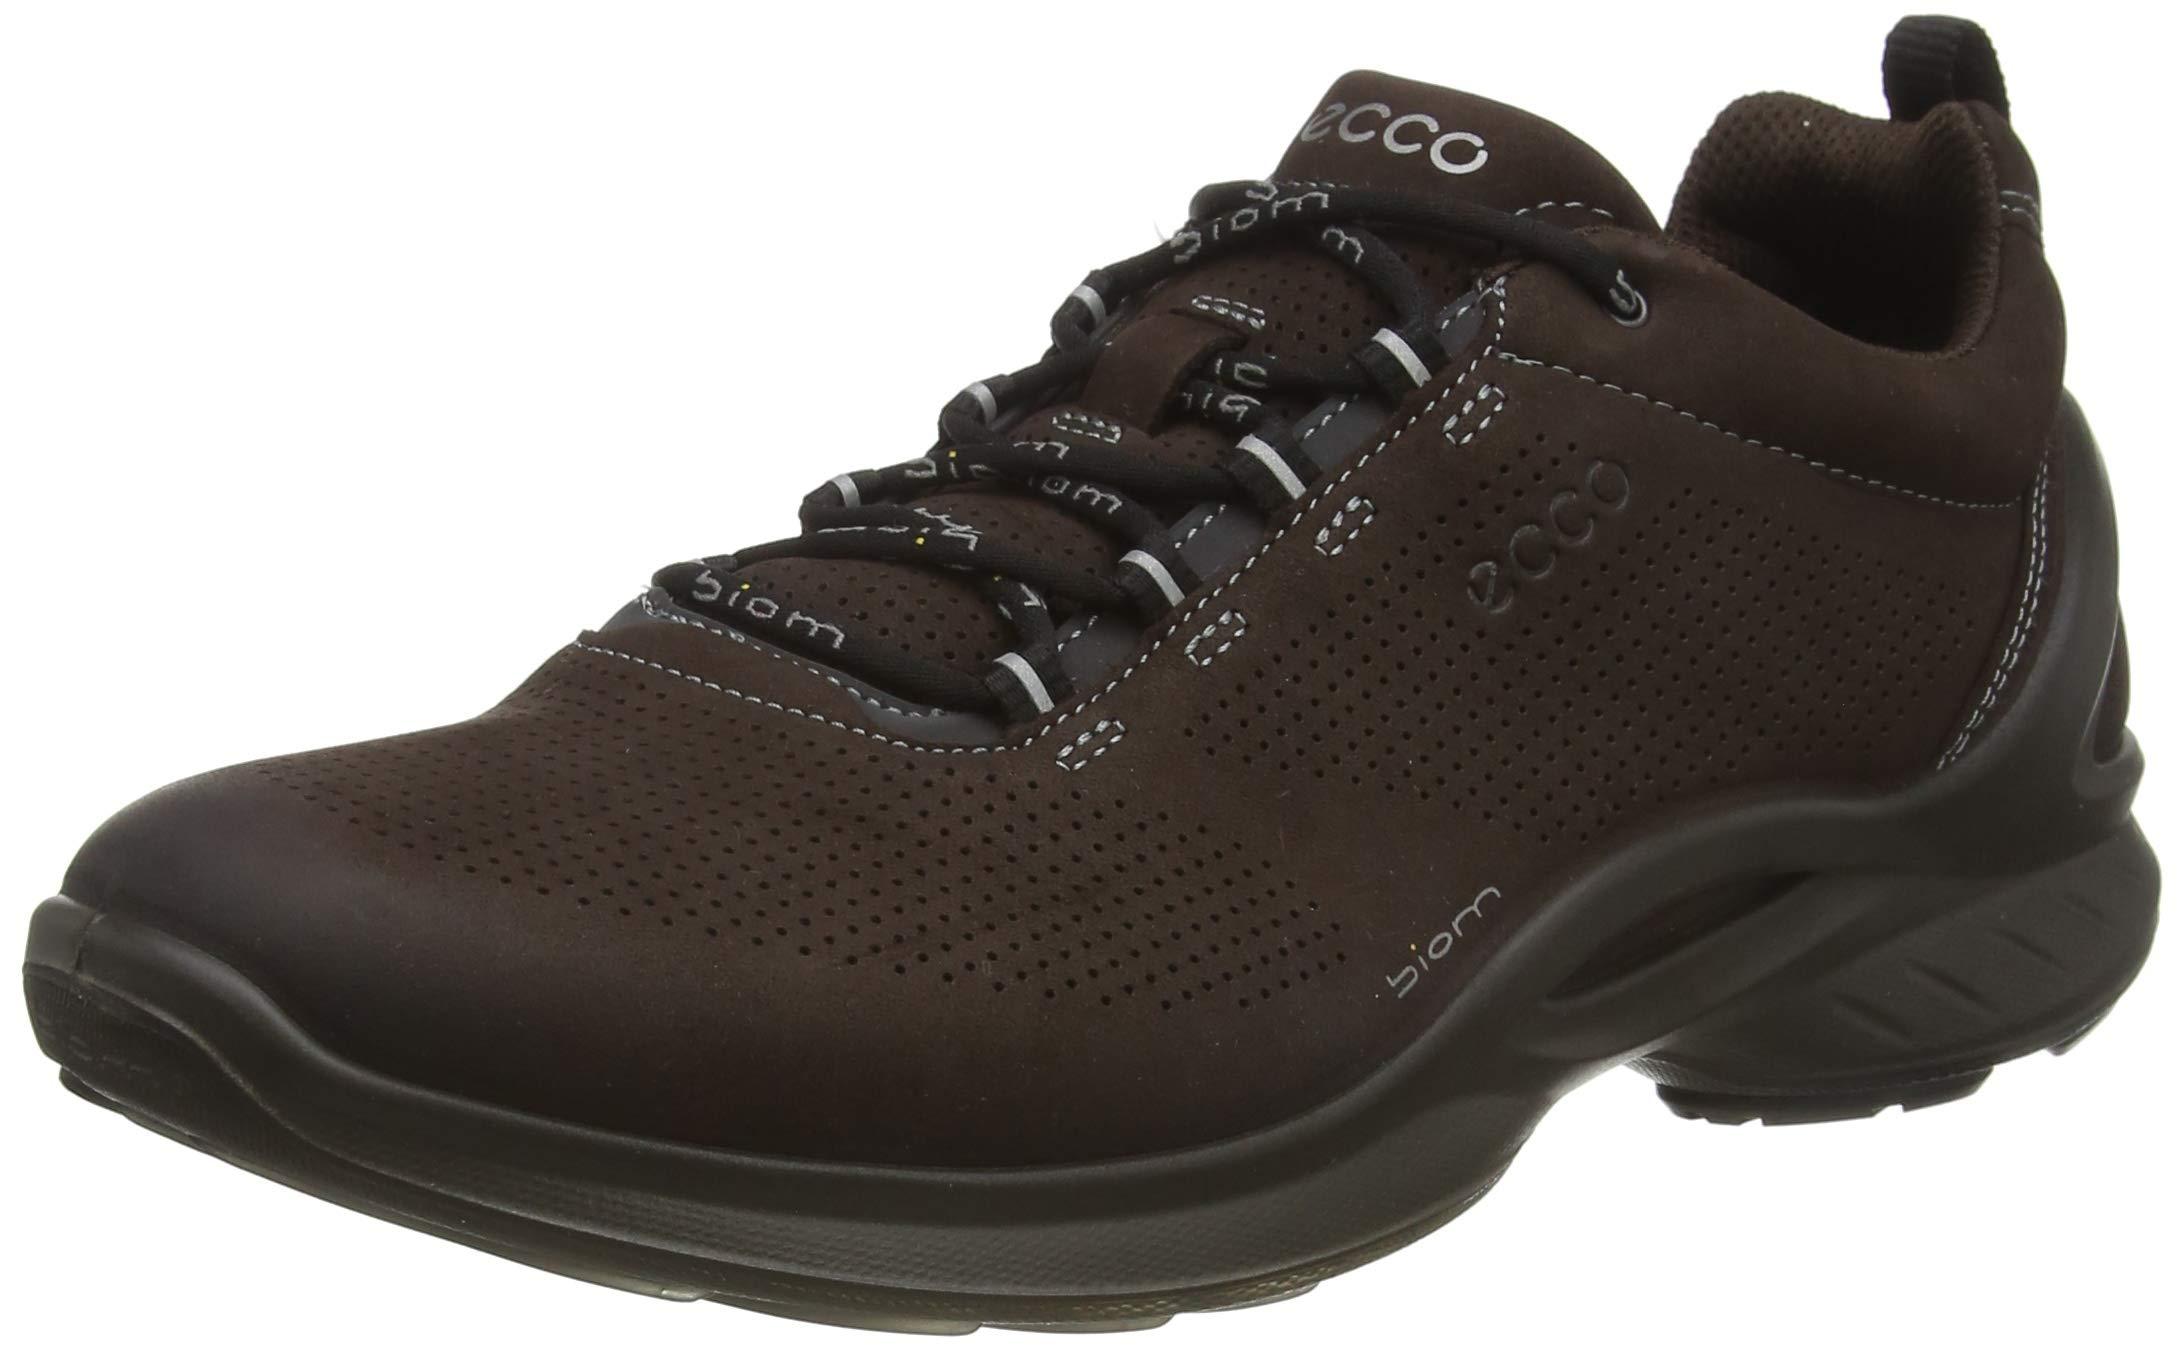 Ecco Leather Mens Biom Fjuel Perforated Walking Shoe for Men - Save 8% ...